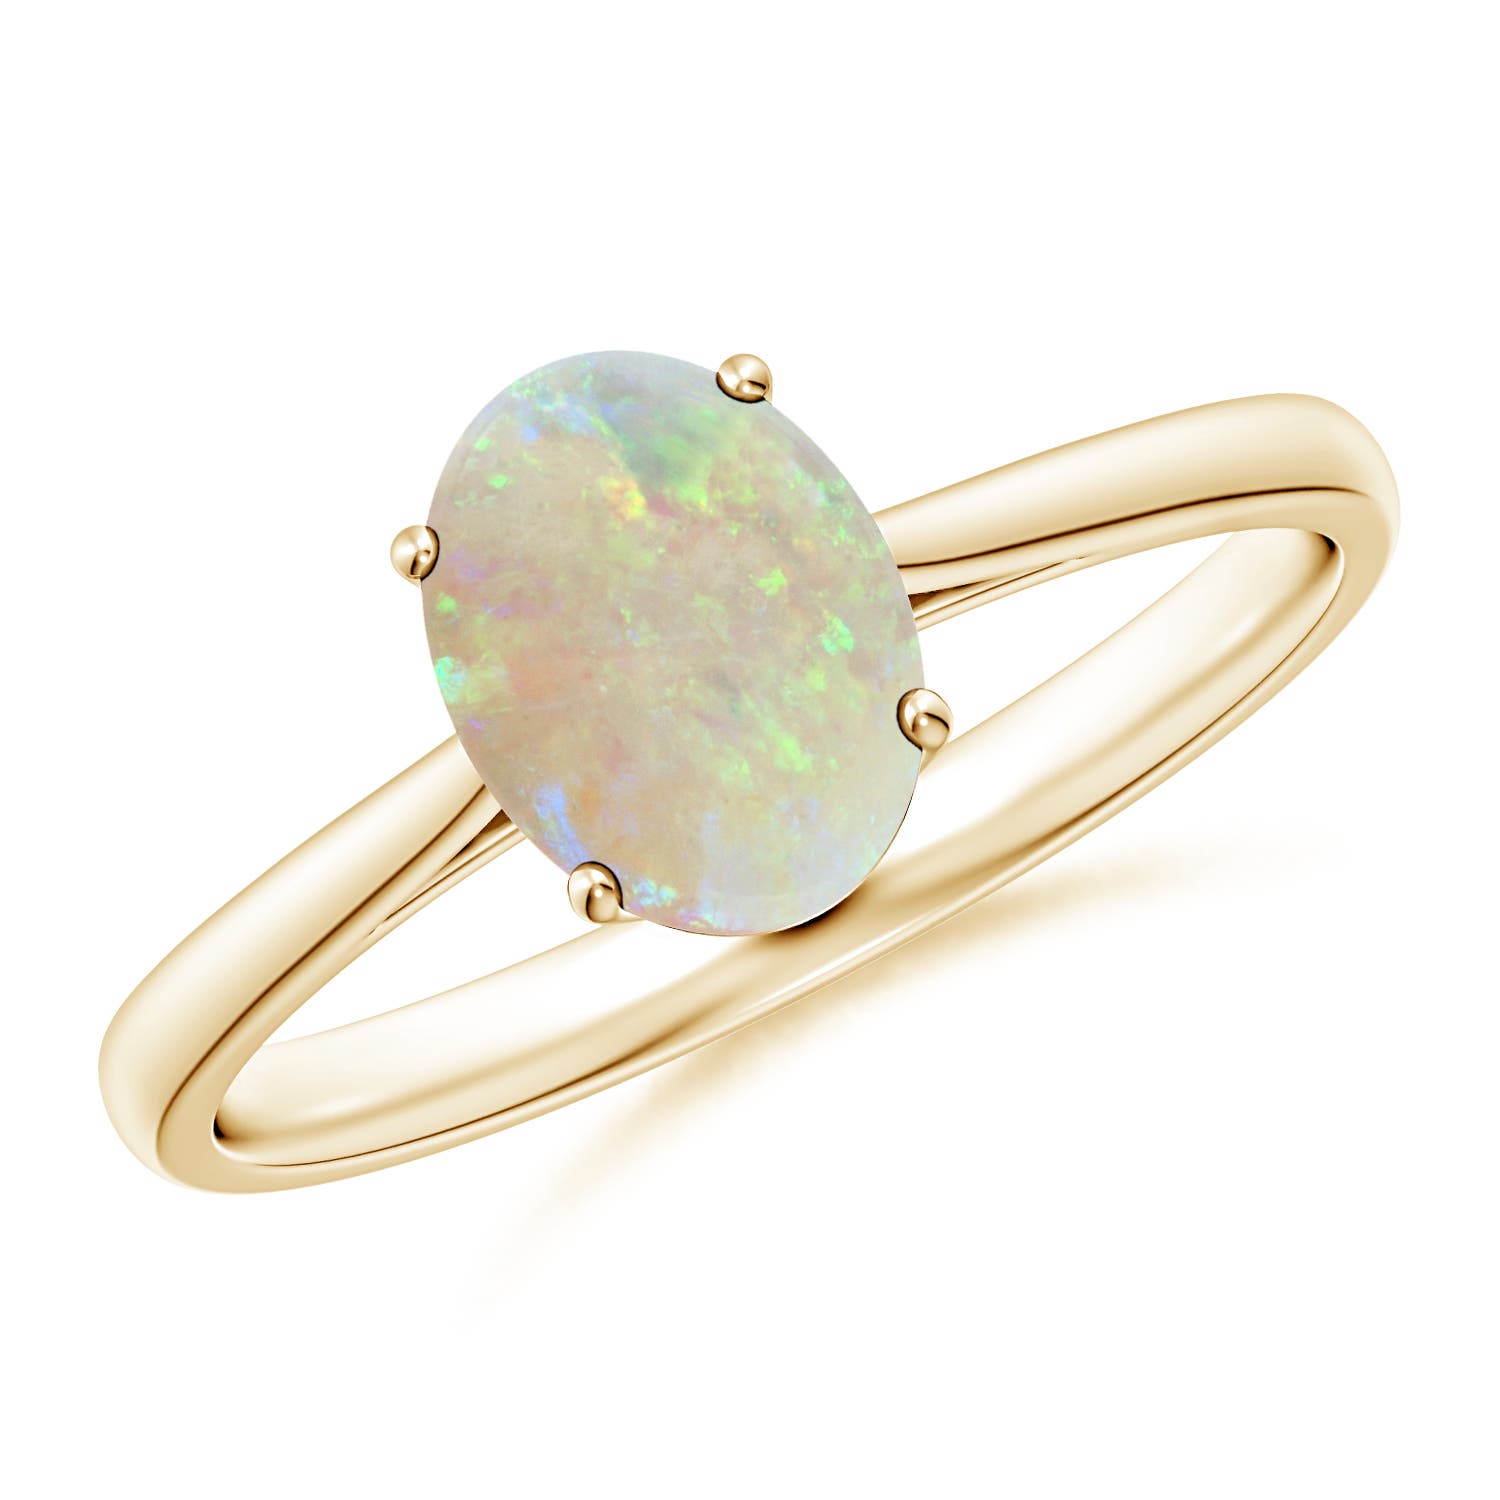 AAA - Opal / 0.8 CT / 14 KT Yellow Gold